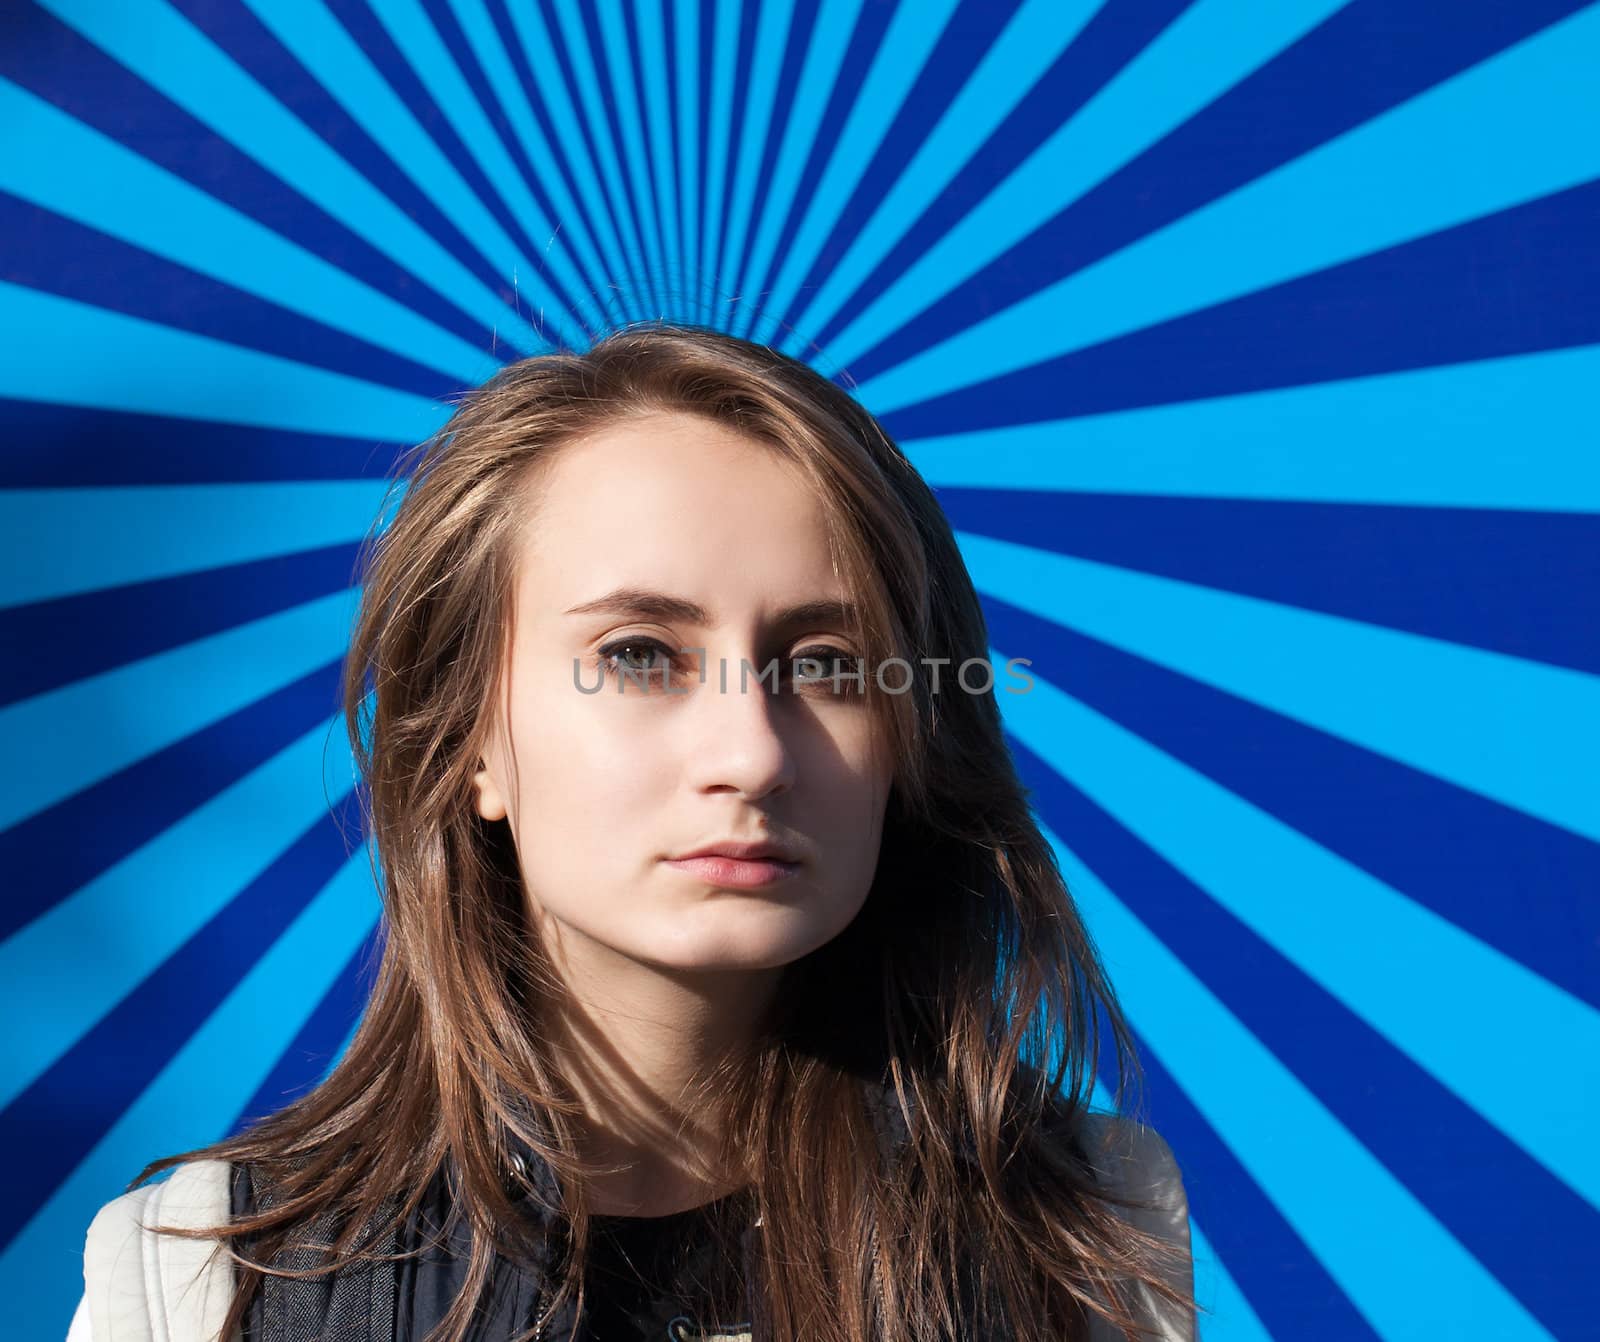 Young woman portrait on a striped background